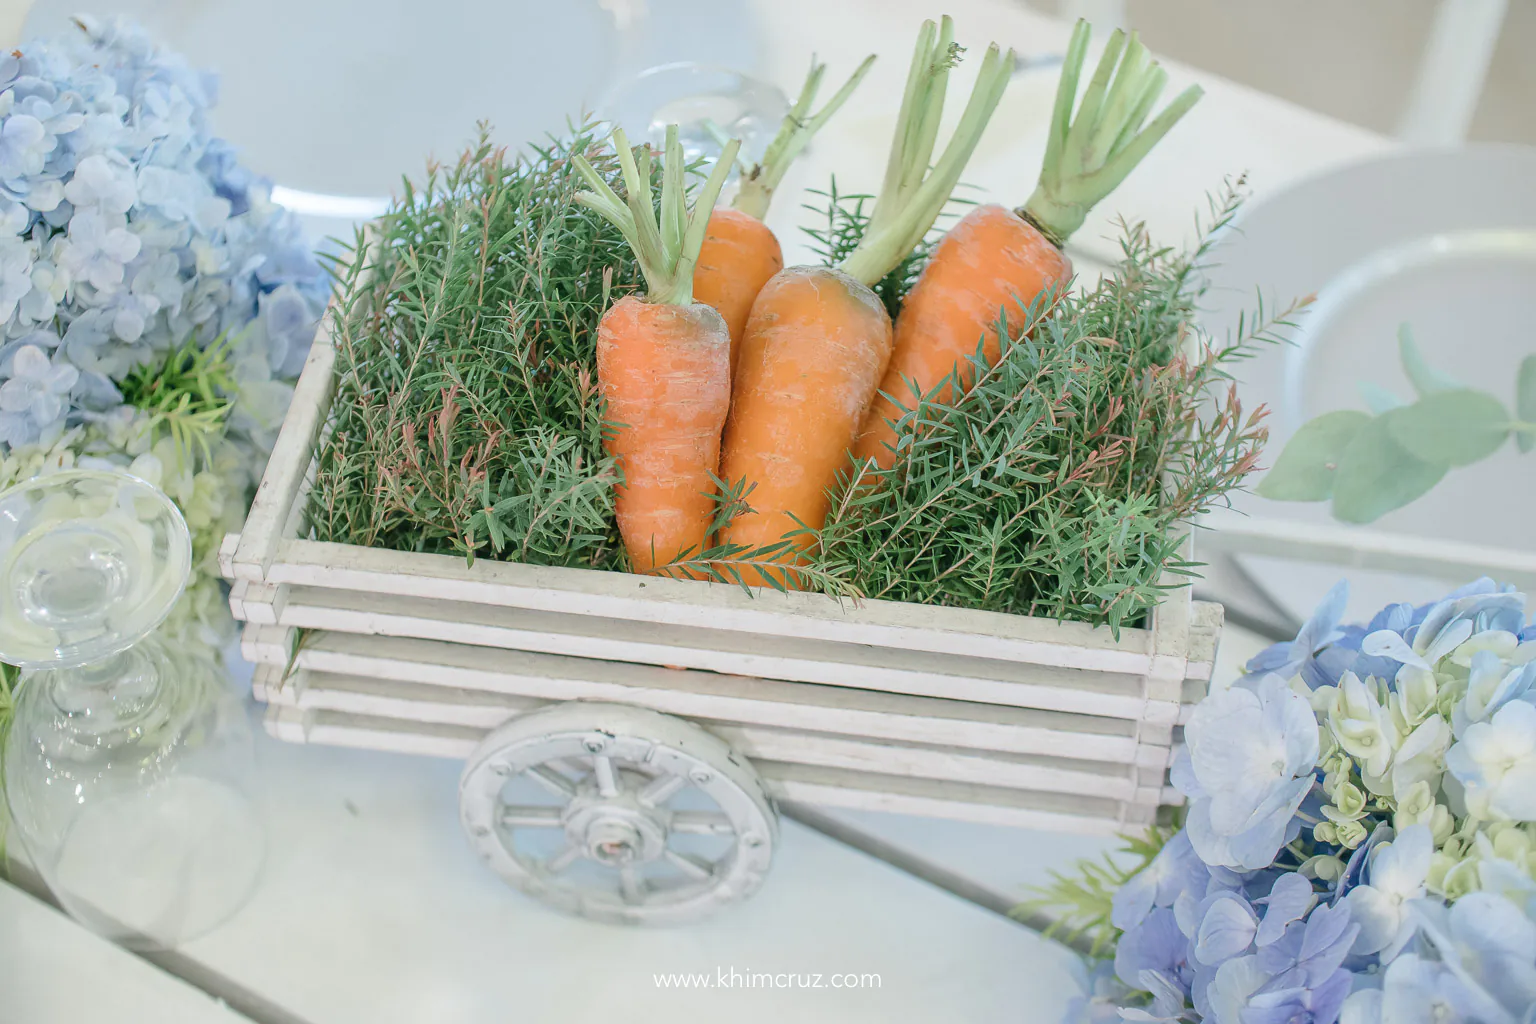 carrots on cart fresh produce table centerpiece Peter Rabbit themed party